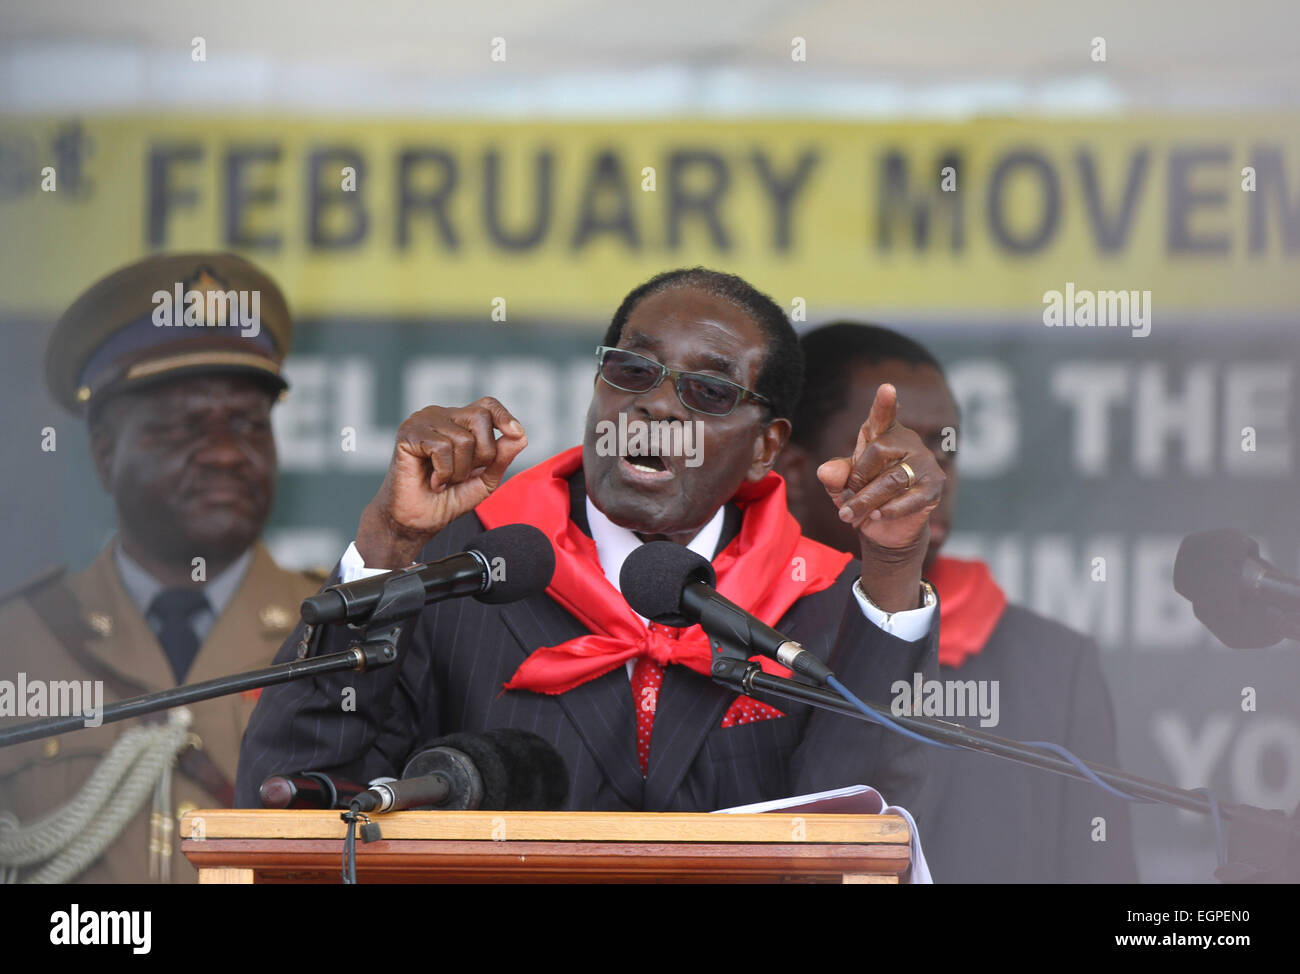 Victoria Falls, Zimbabwe. 28th February, 2015. Zimbabwean President Robert Mugabe addresses at a public celebration held to mark his 91st birthday in Victoria Falls, Zimbabwe, Feb. 28, 2015. Mugabe, who turns 91 this month, is the oldest leader in the world and one of the longest-serving African statesmen. Having ruled Zimbabwe for 35 years since independence, Mugabe was endorsed by the ruling ZANU-PF party as the sole candidate to contest at the age of 94 in the next presidential election in 2018. Credit:  Xinhua/Alamy Live News Stock Photo